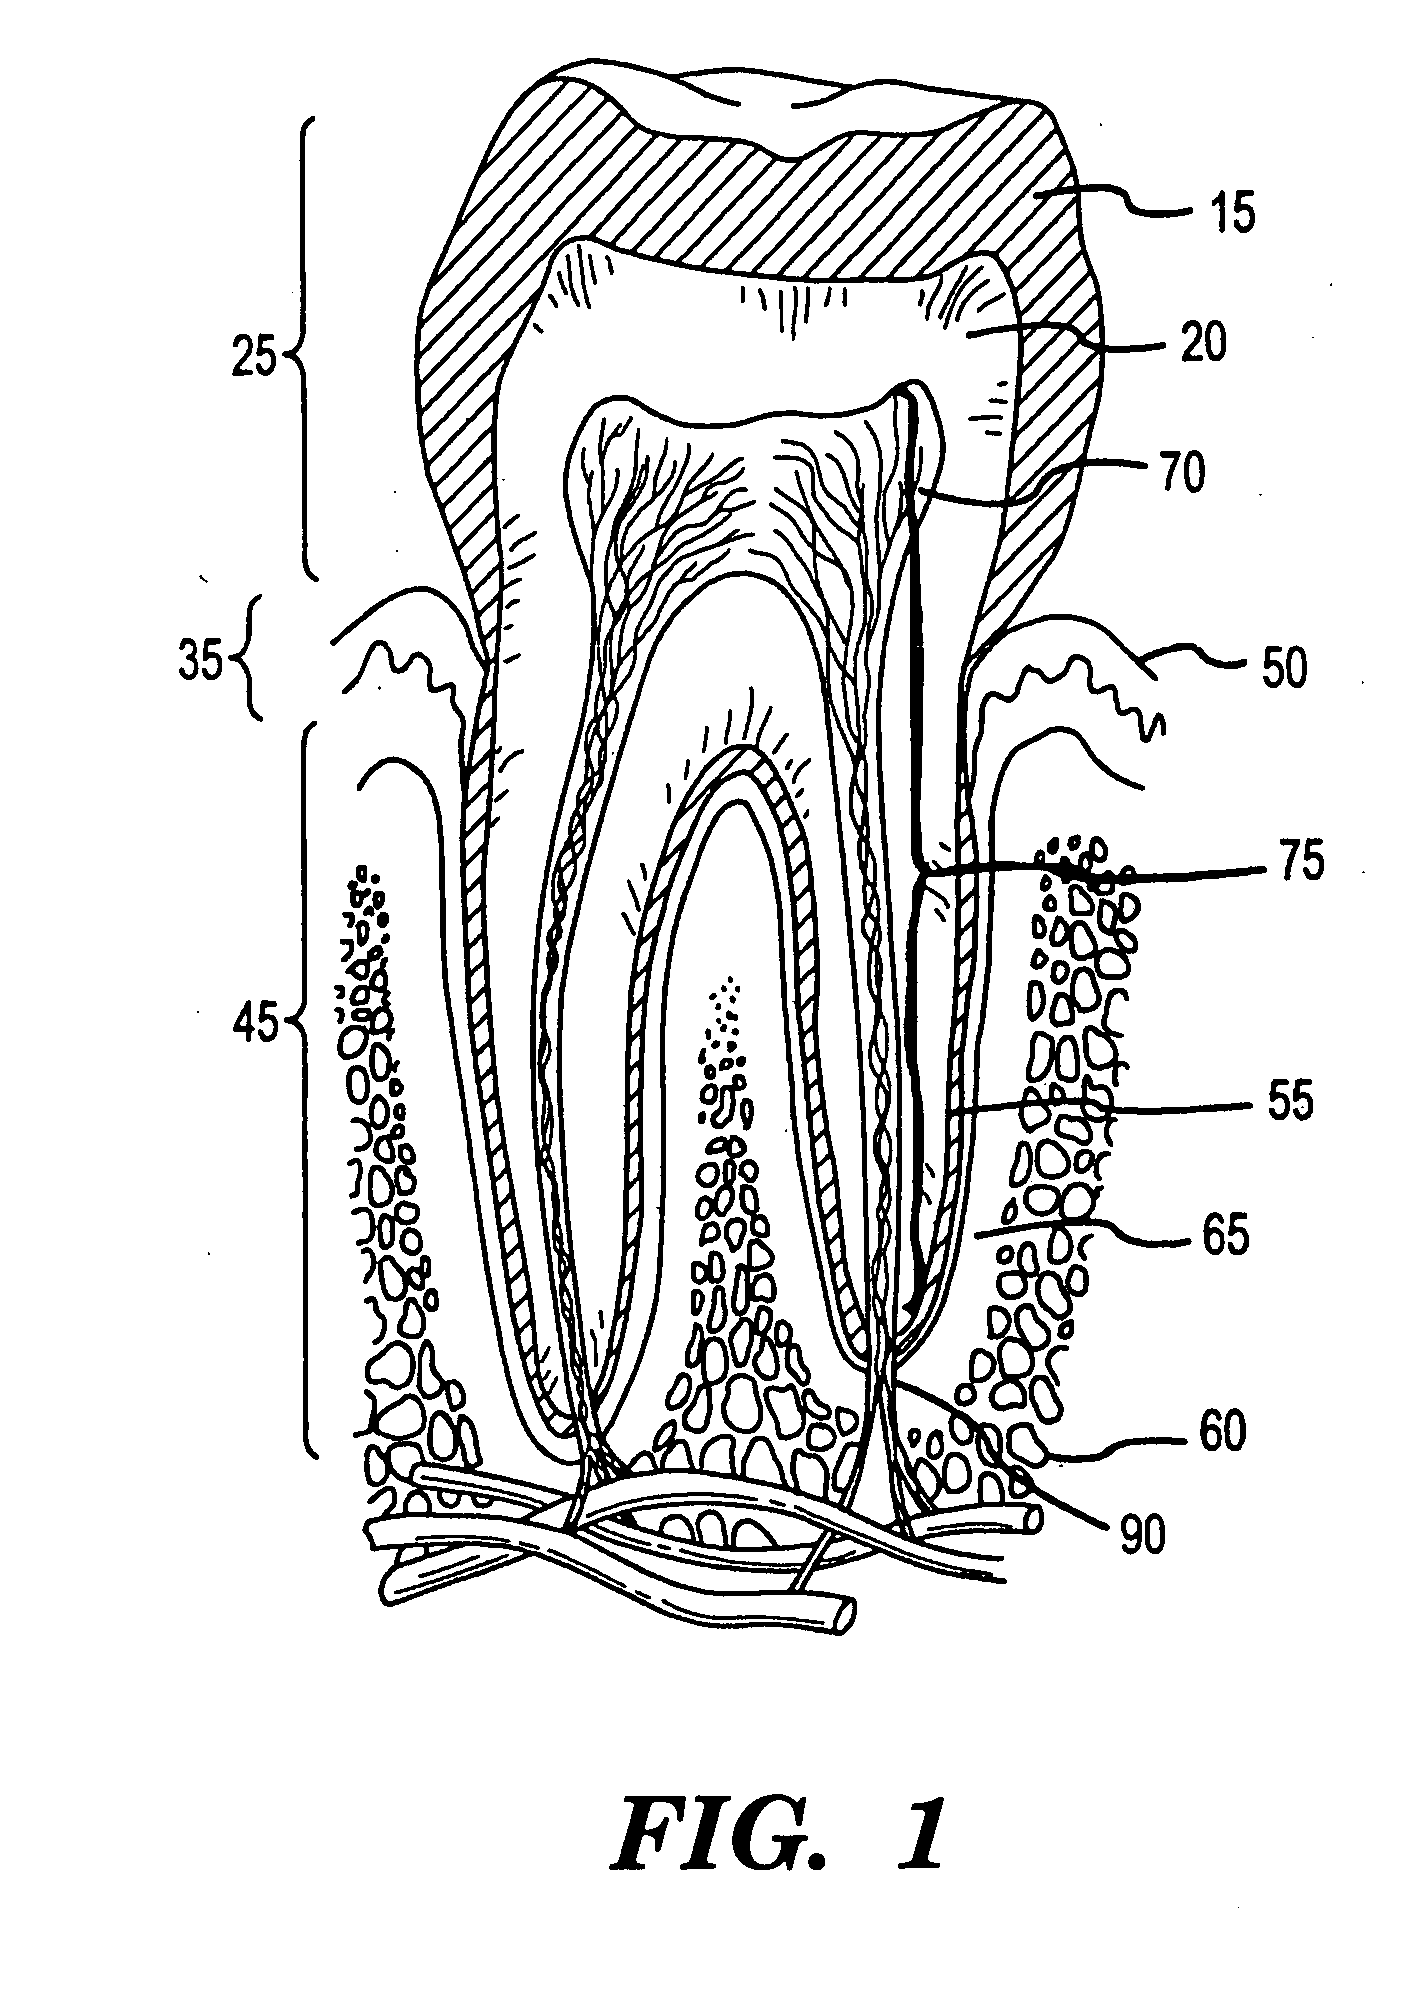 Methods for treating dental conditions using tissue scaffolds